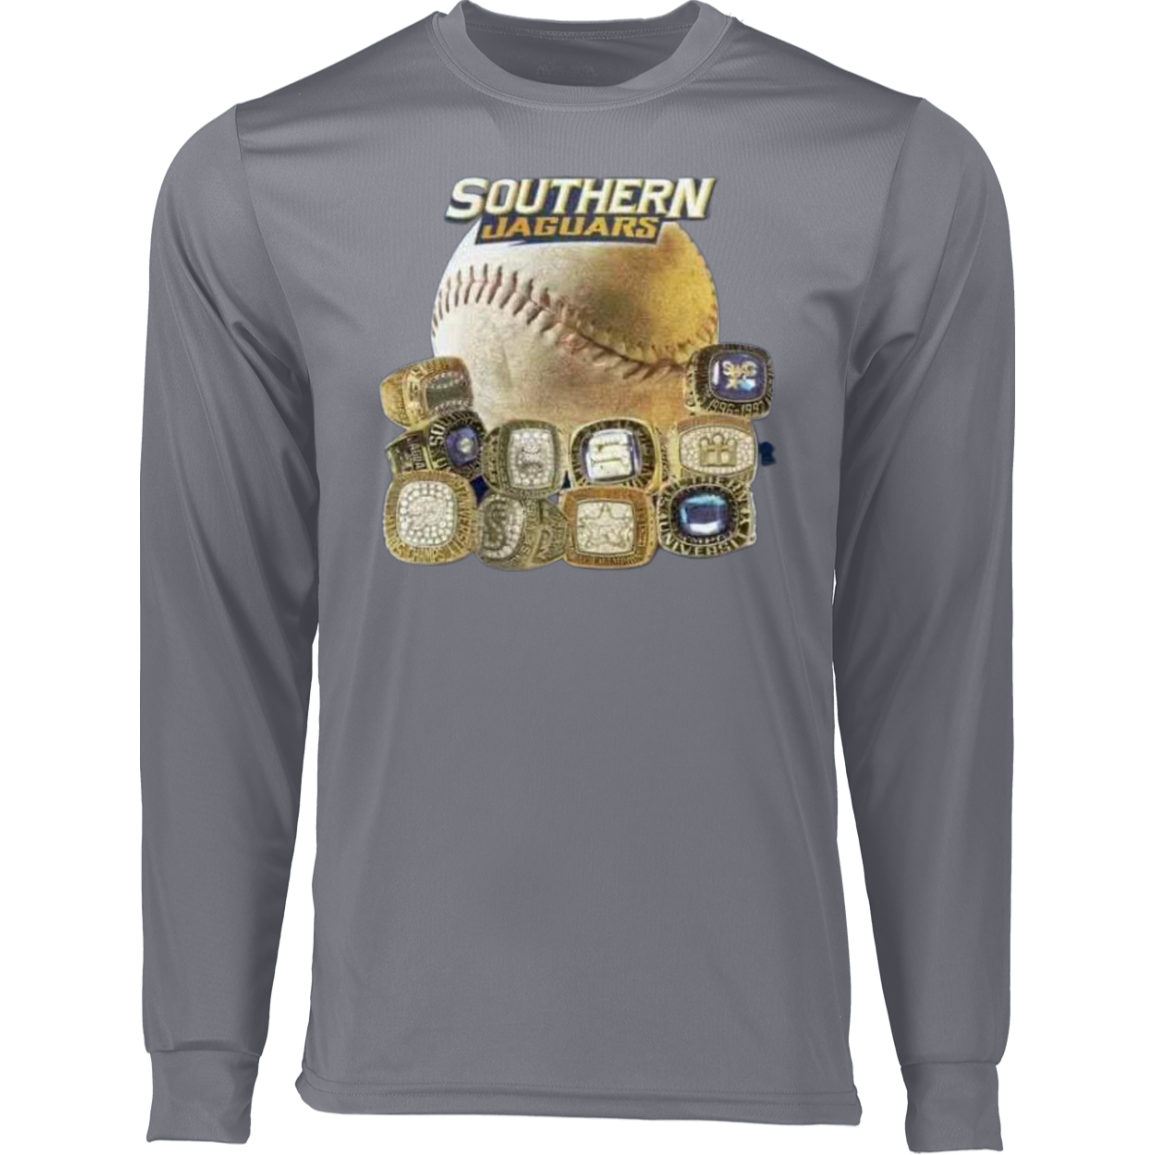 SU Baseball SWAC (Southern Wins Another Championship)  Rings 788 Long Sleeve Moisture-Wicking Tee